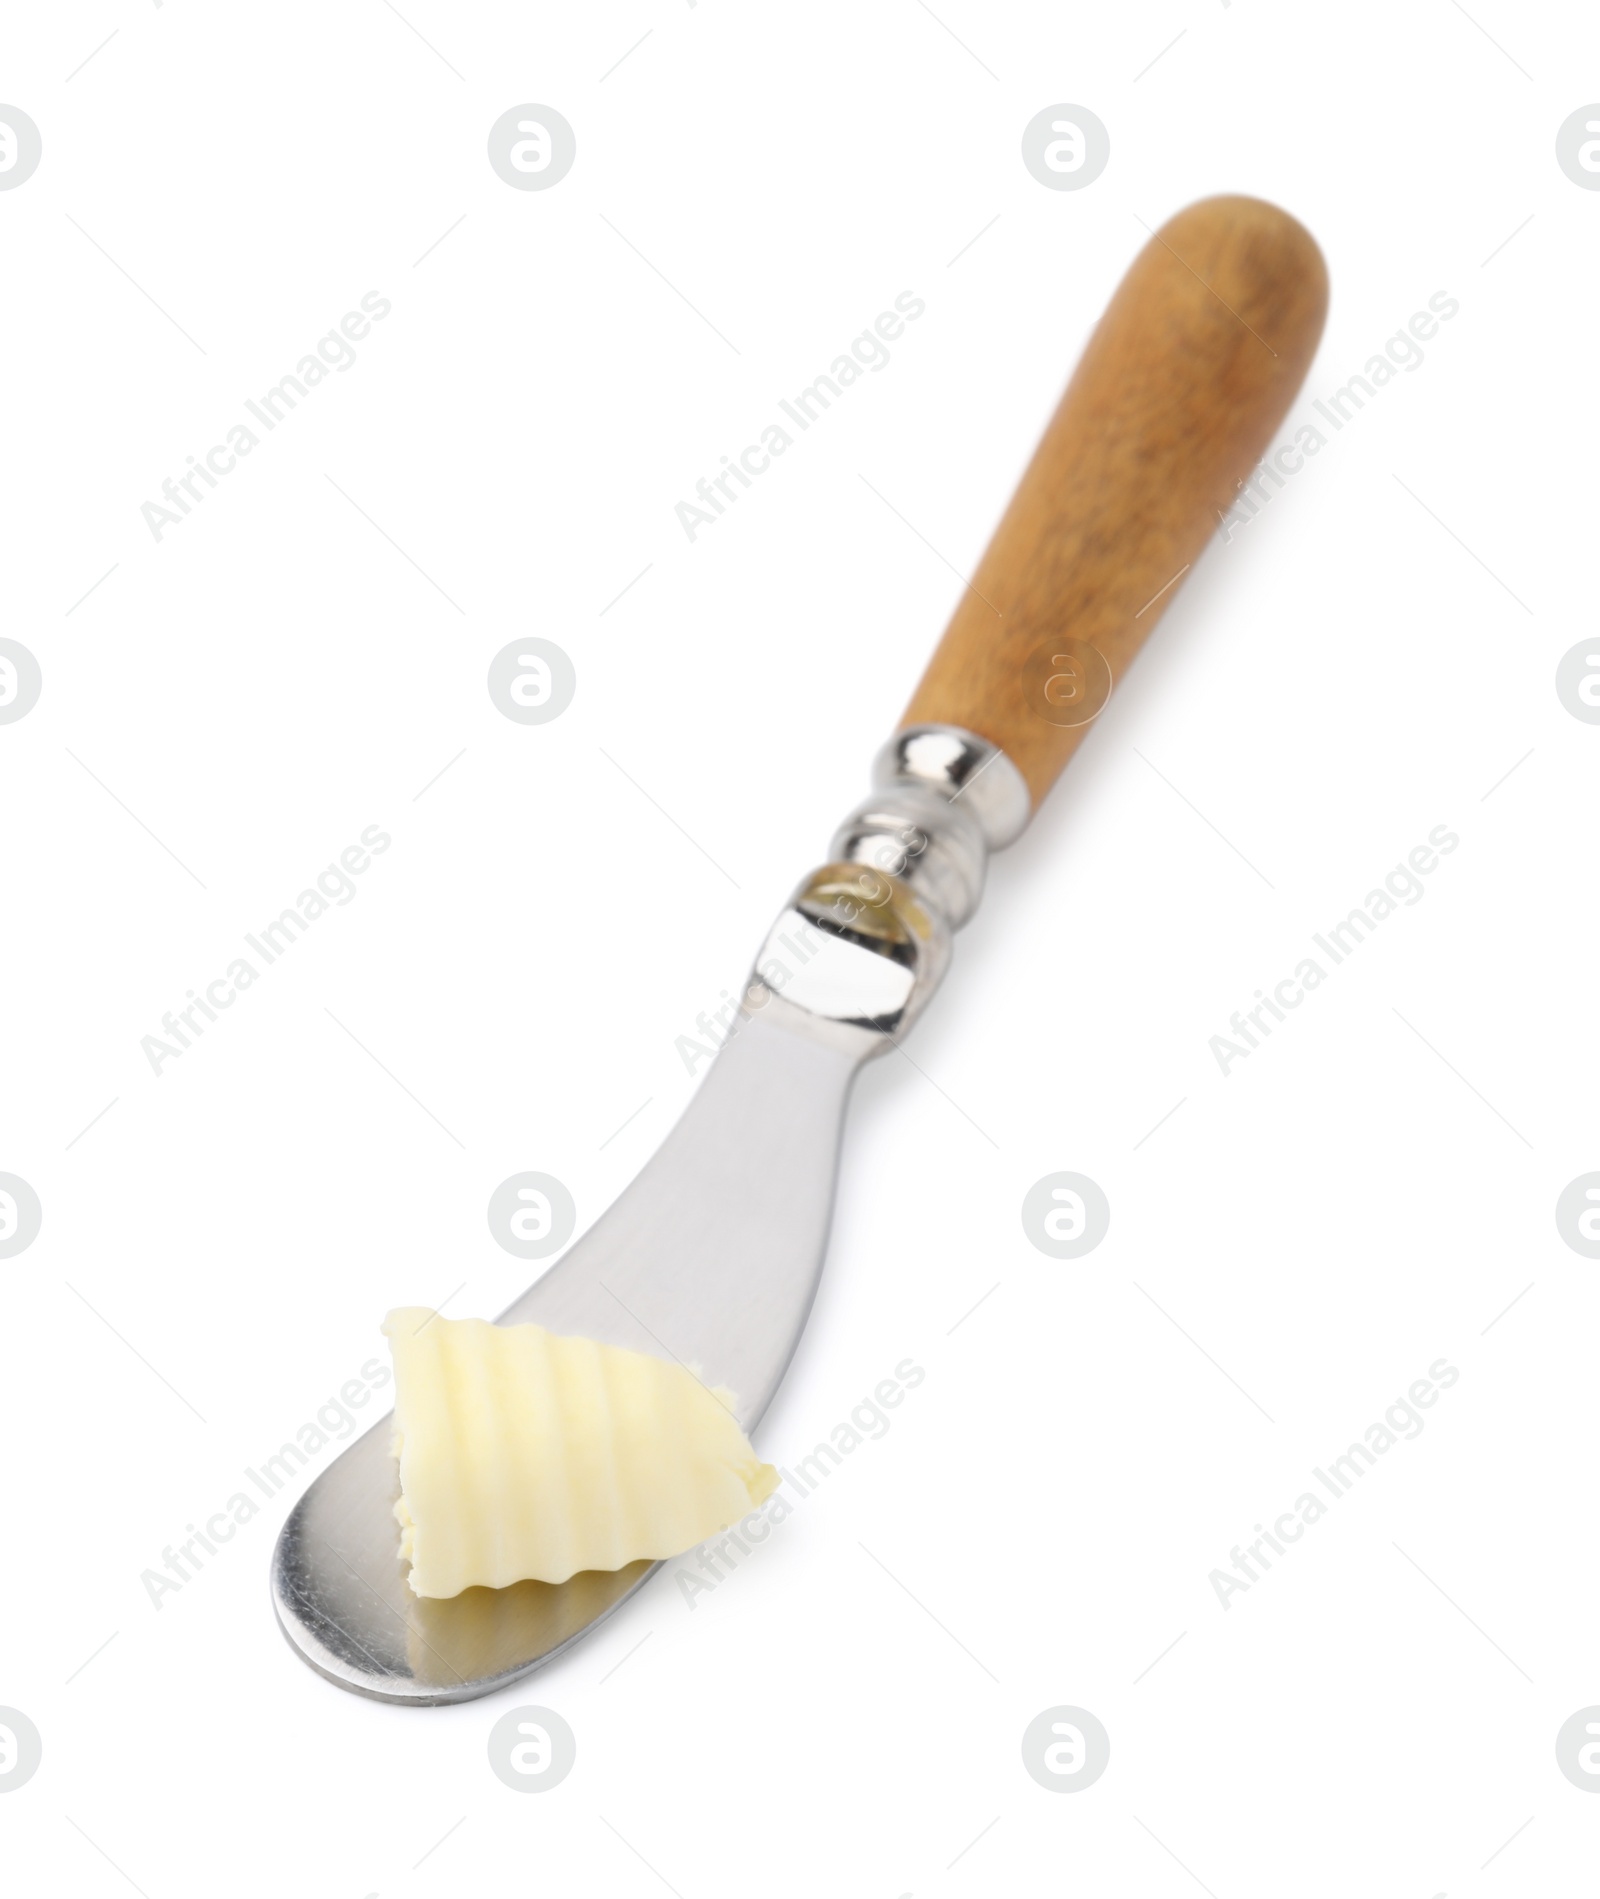 Photo of Butter curl and knife isolated on white